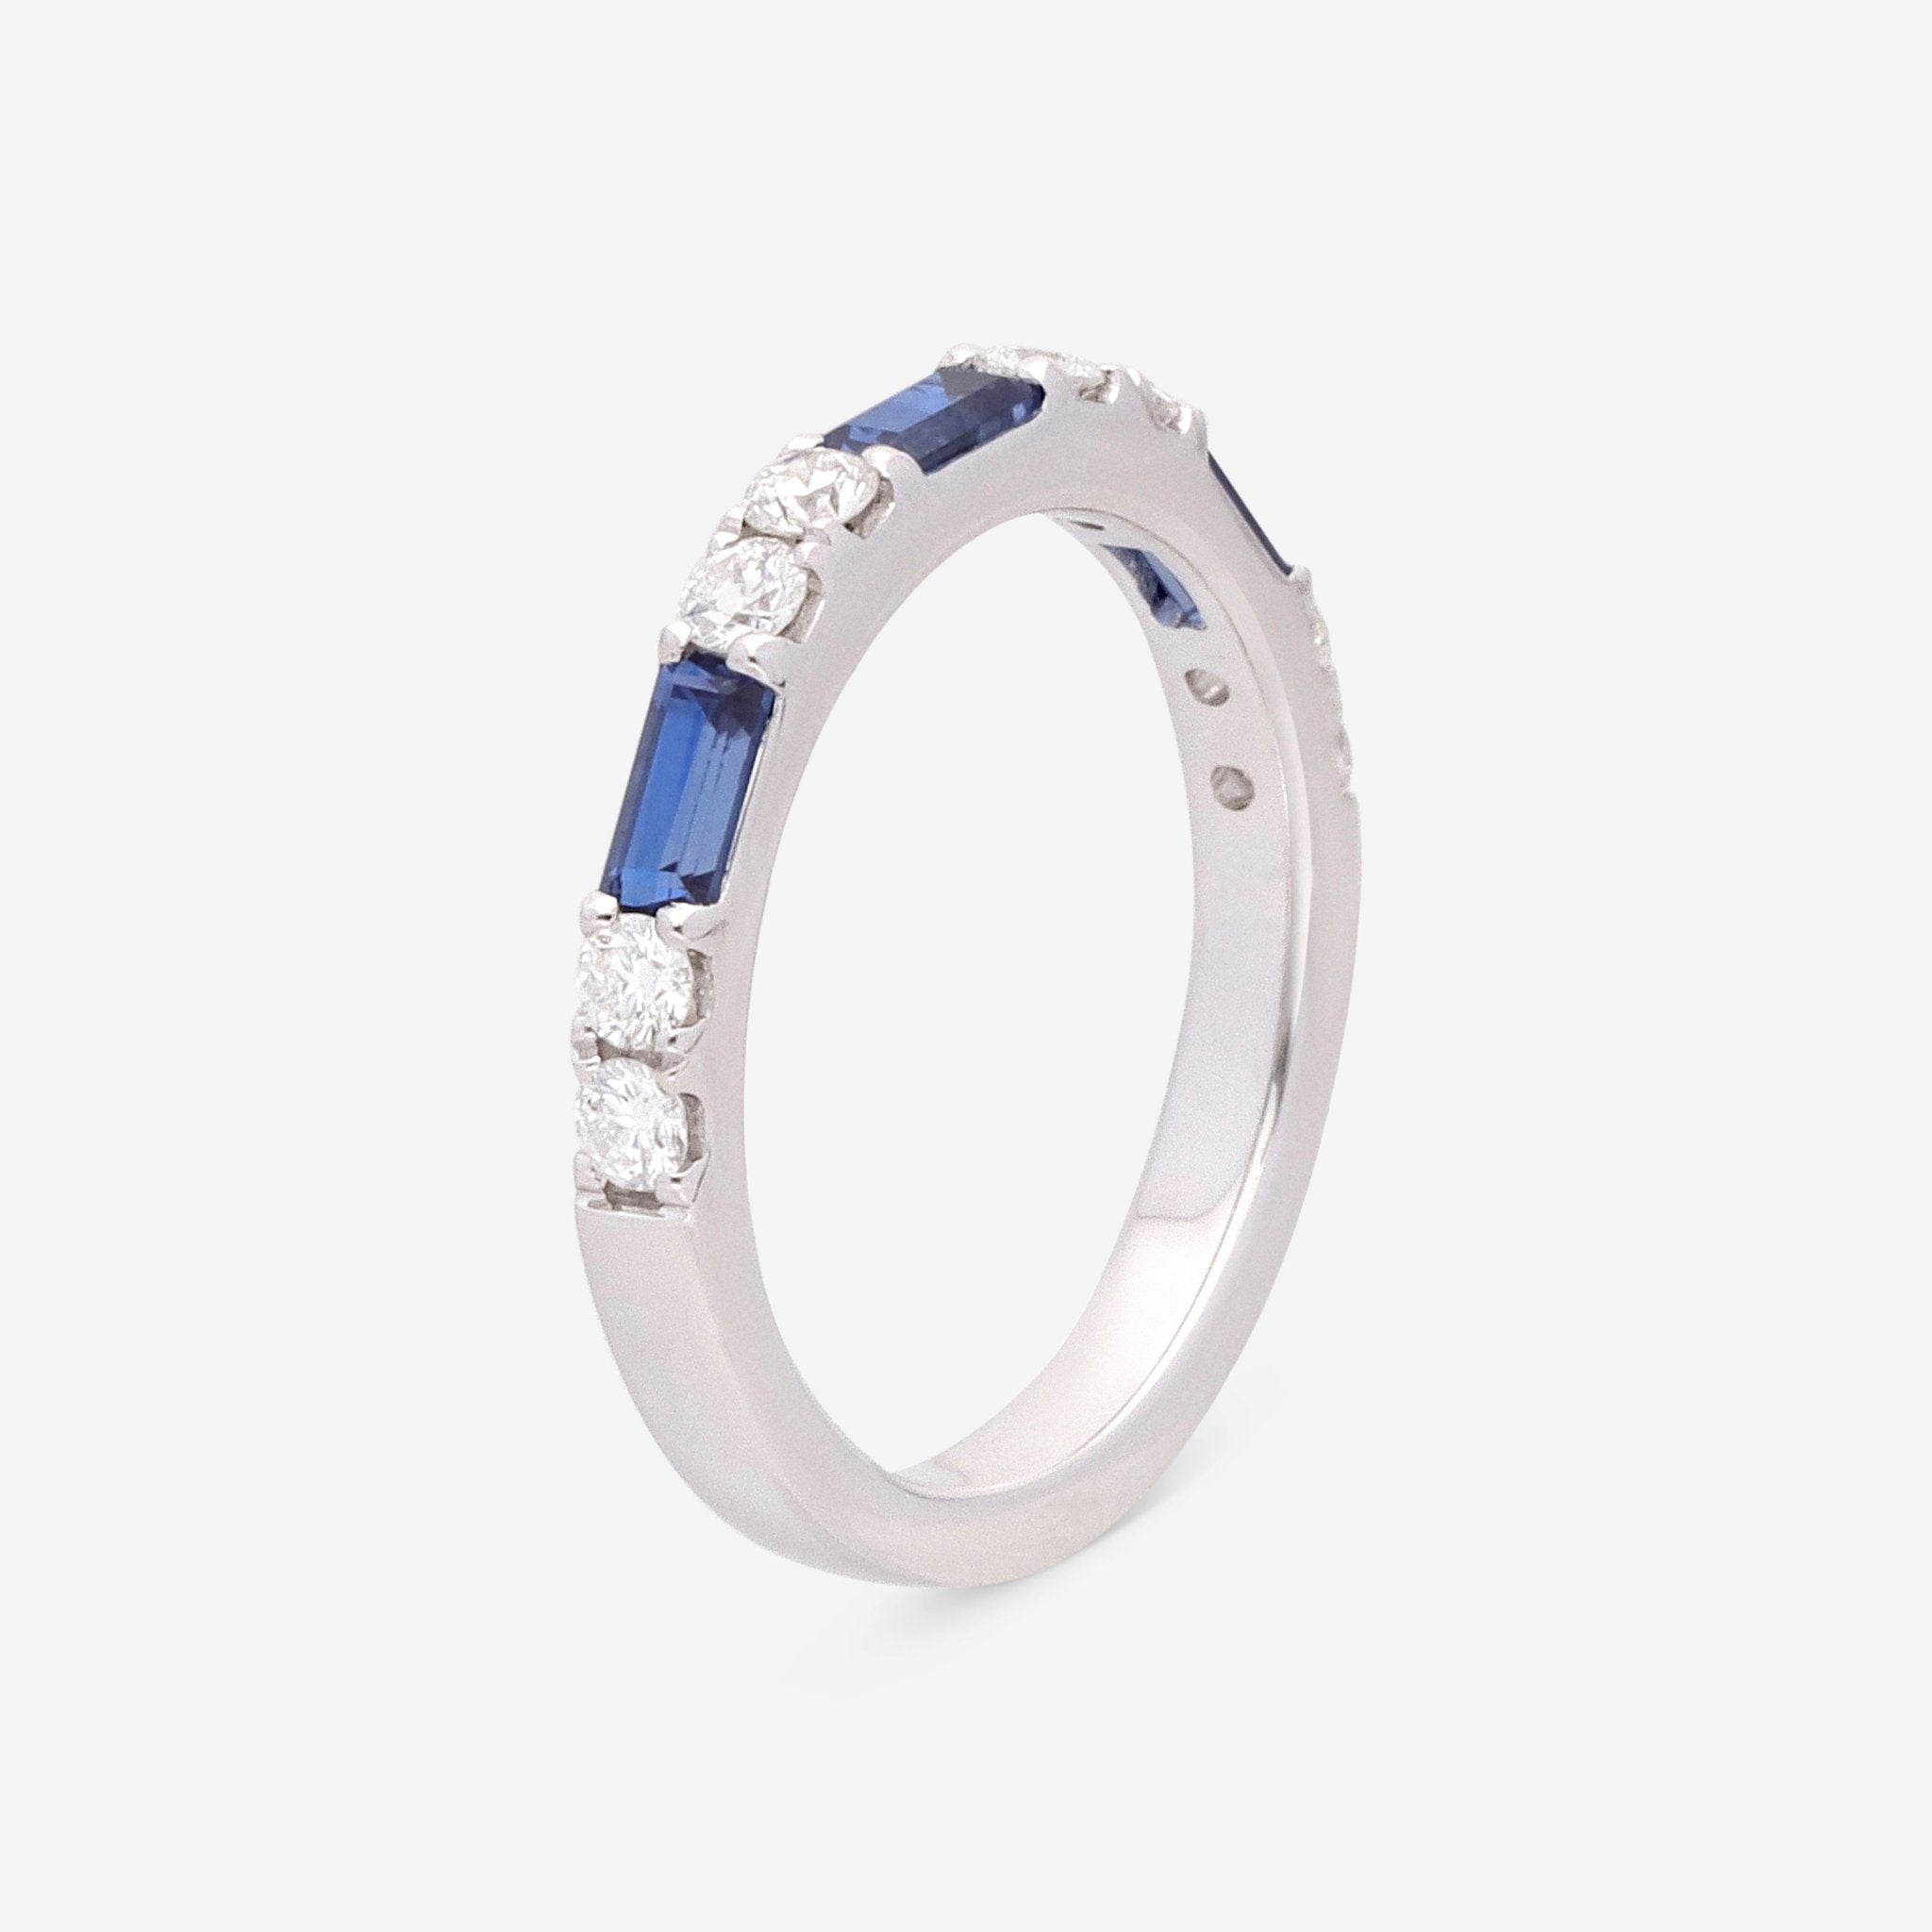 Ina Mar 14K White Gold Alternating Baguette Sapphire and Diamond Ring RG - 085897 - Sapp - THE SOLIST - Ina Mar